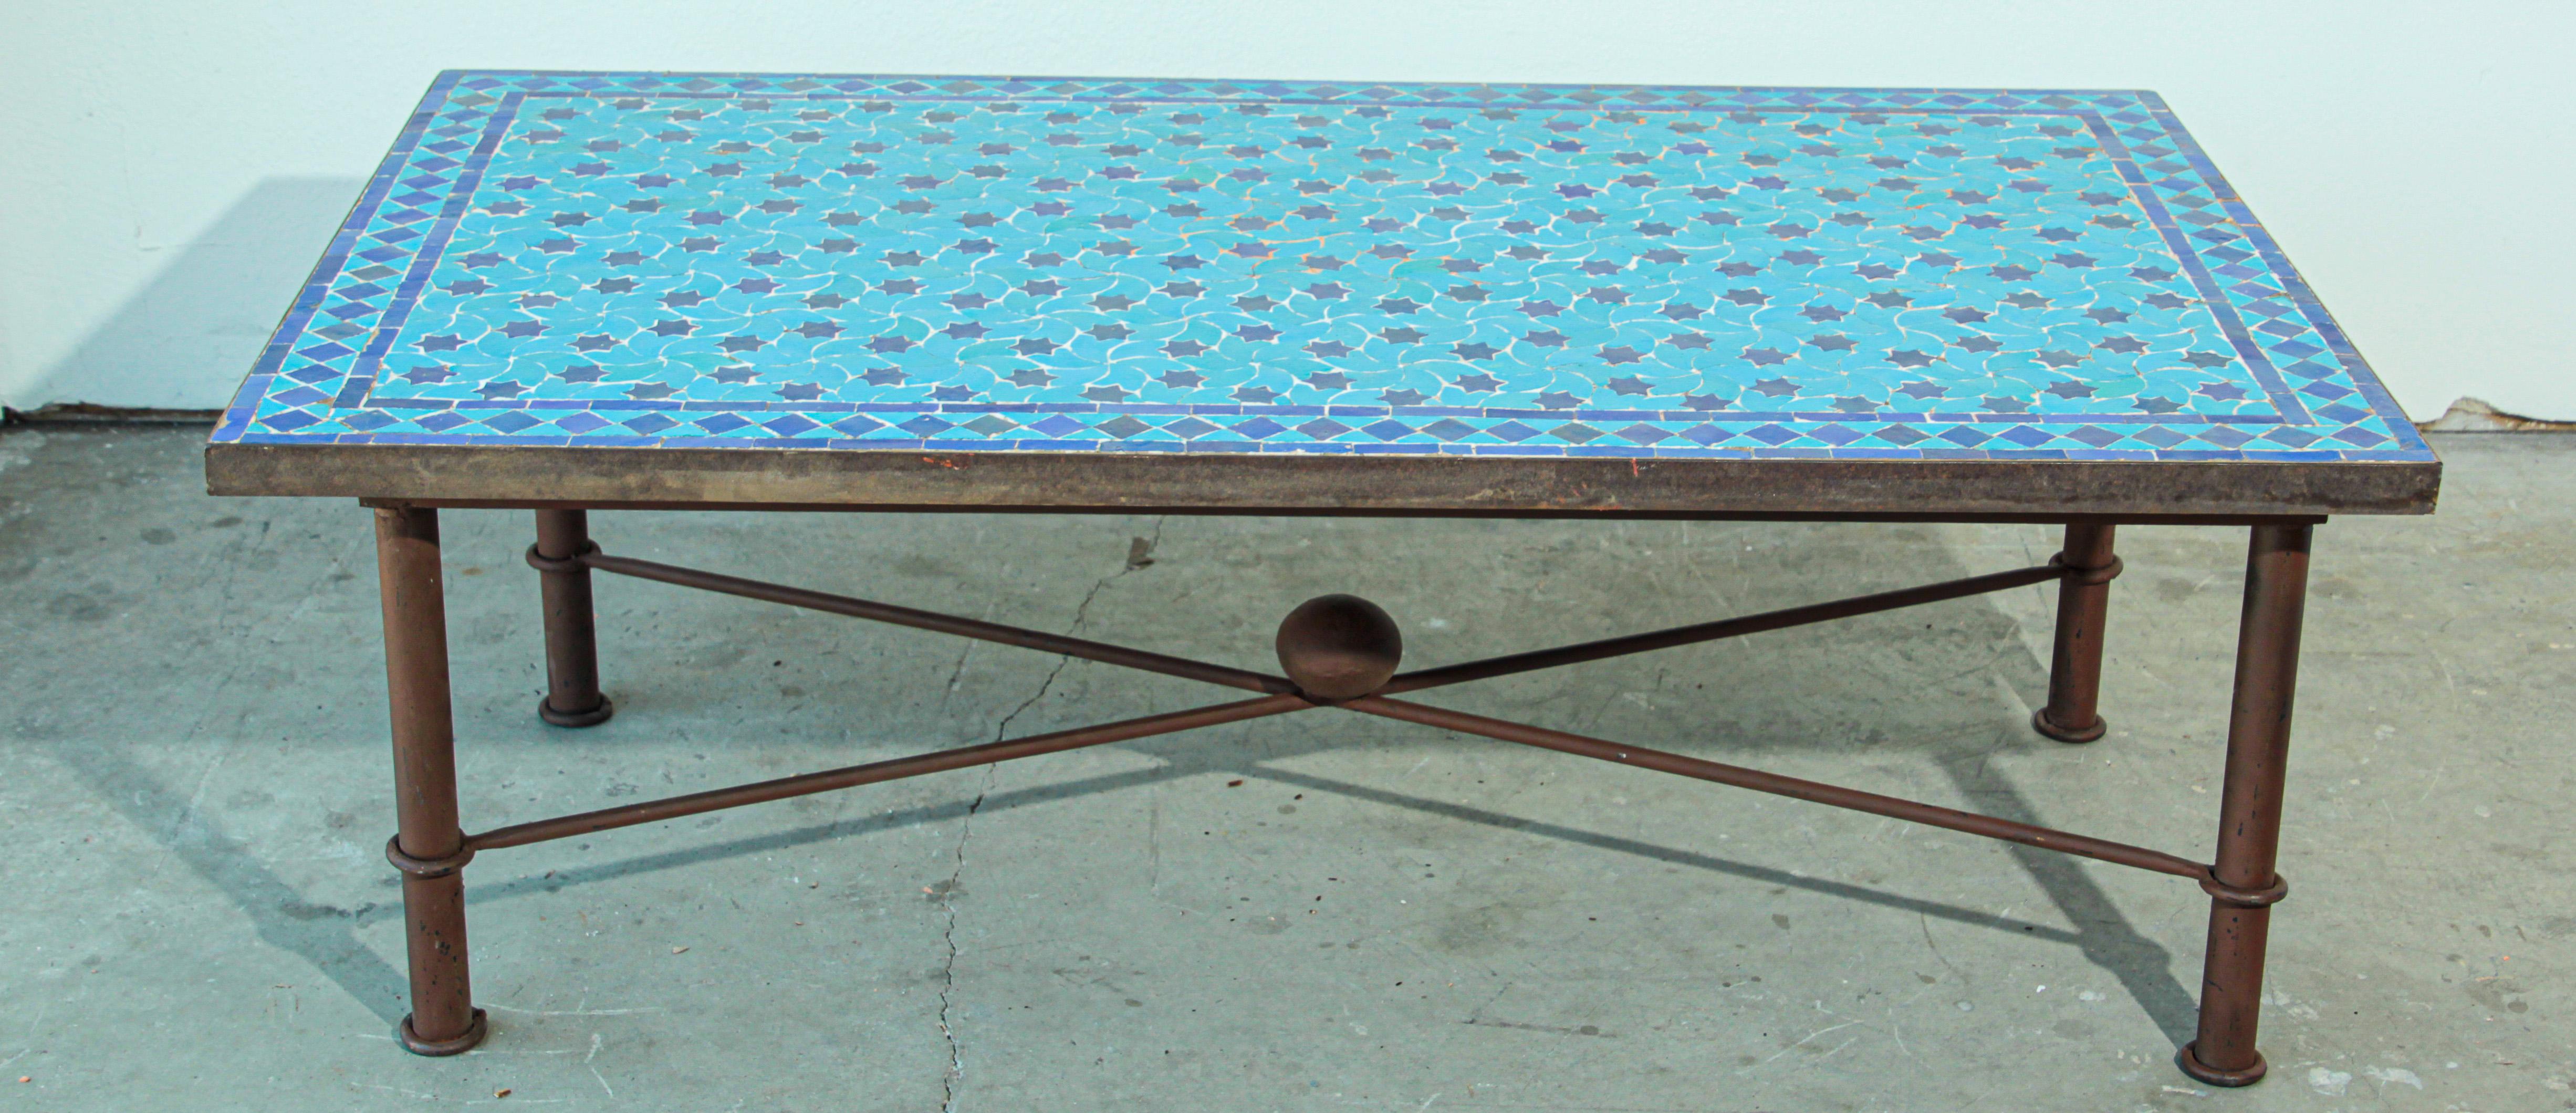 Handcrafted vintage mosaic tile tabletop, handmade using reclaimed Moroccan tiles of different shades turquoise and cobalt blue colors.
Moroccan glazed and hand chased tiles.
Great Moroccan mosaic tile coffee table, delicately handcrafted in fez